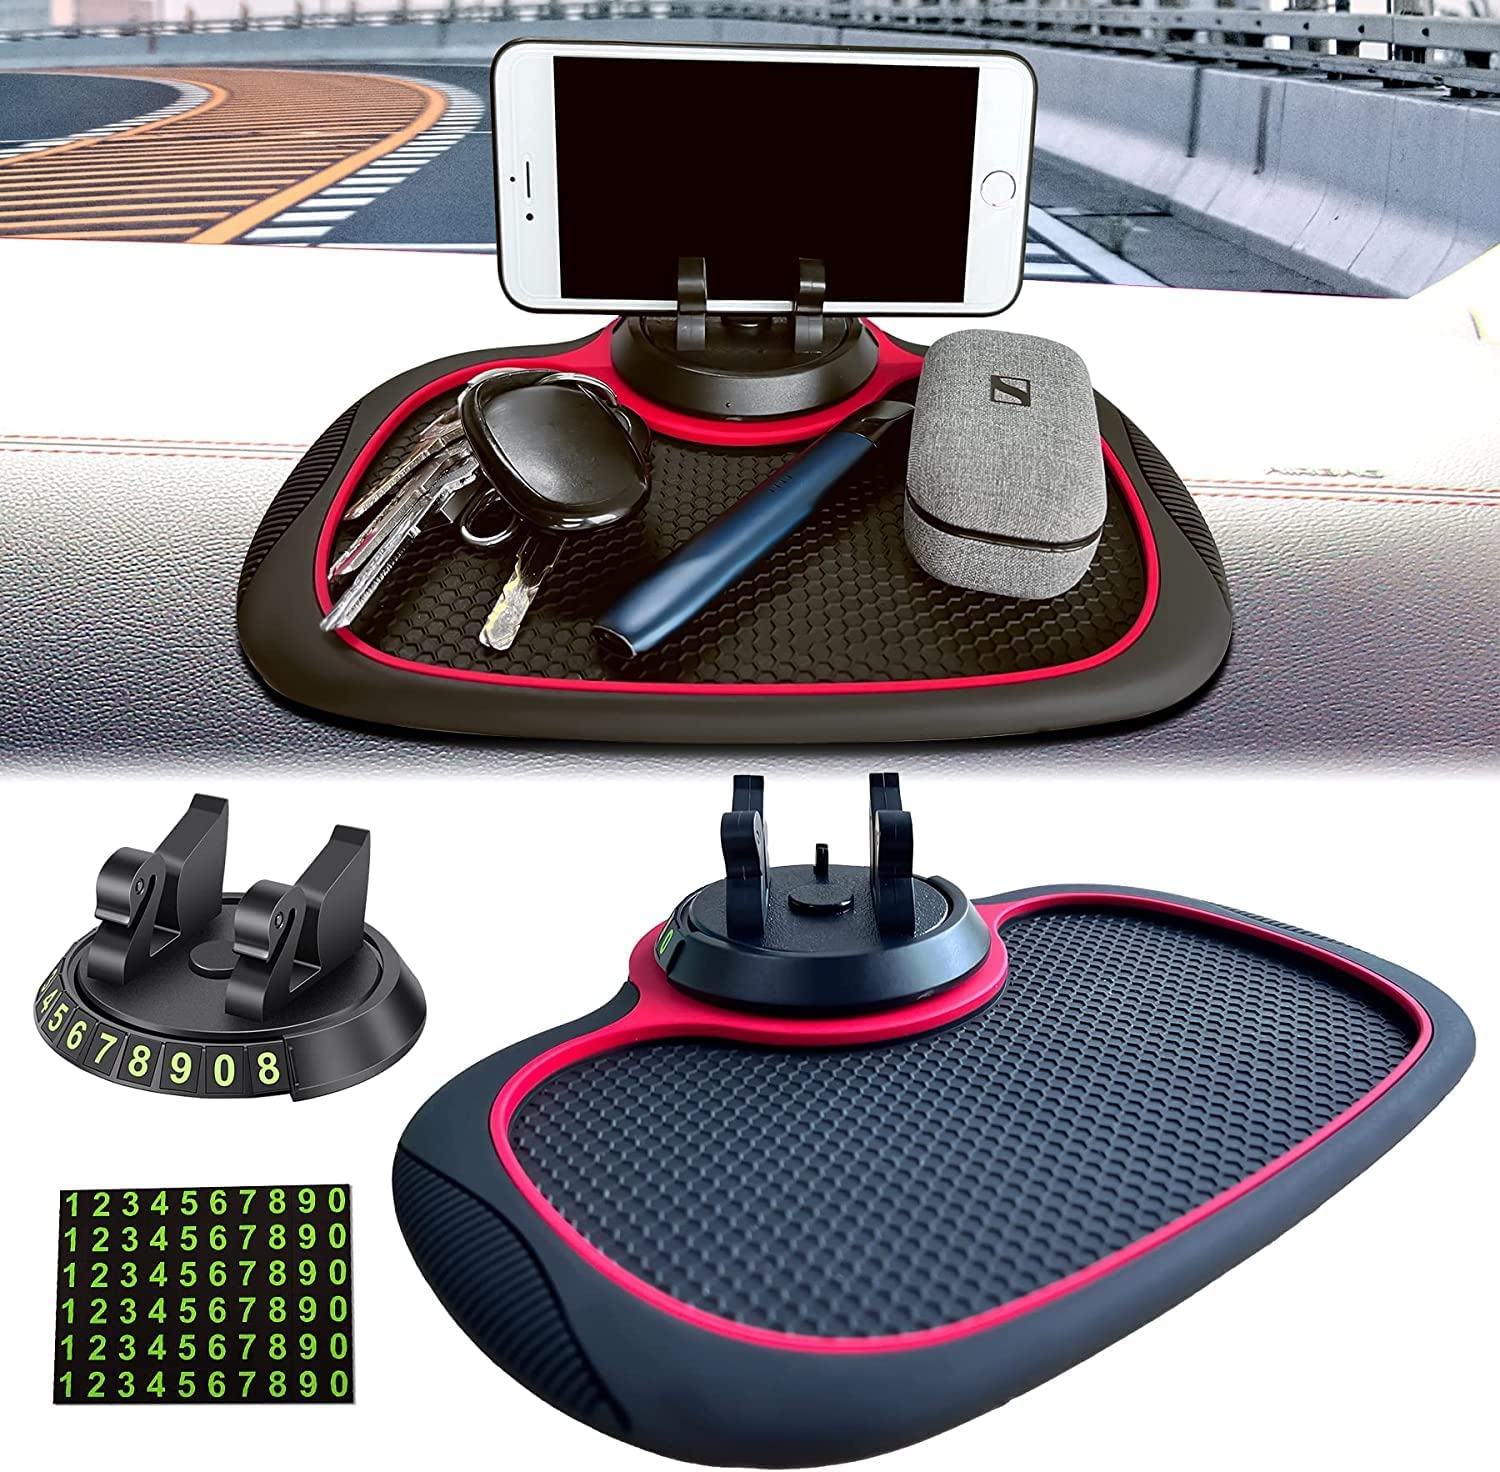 360° Rotating Car Dashboard Mat with Phone Holder - Anti-Slip, Perfect for Smartphone and GPS